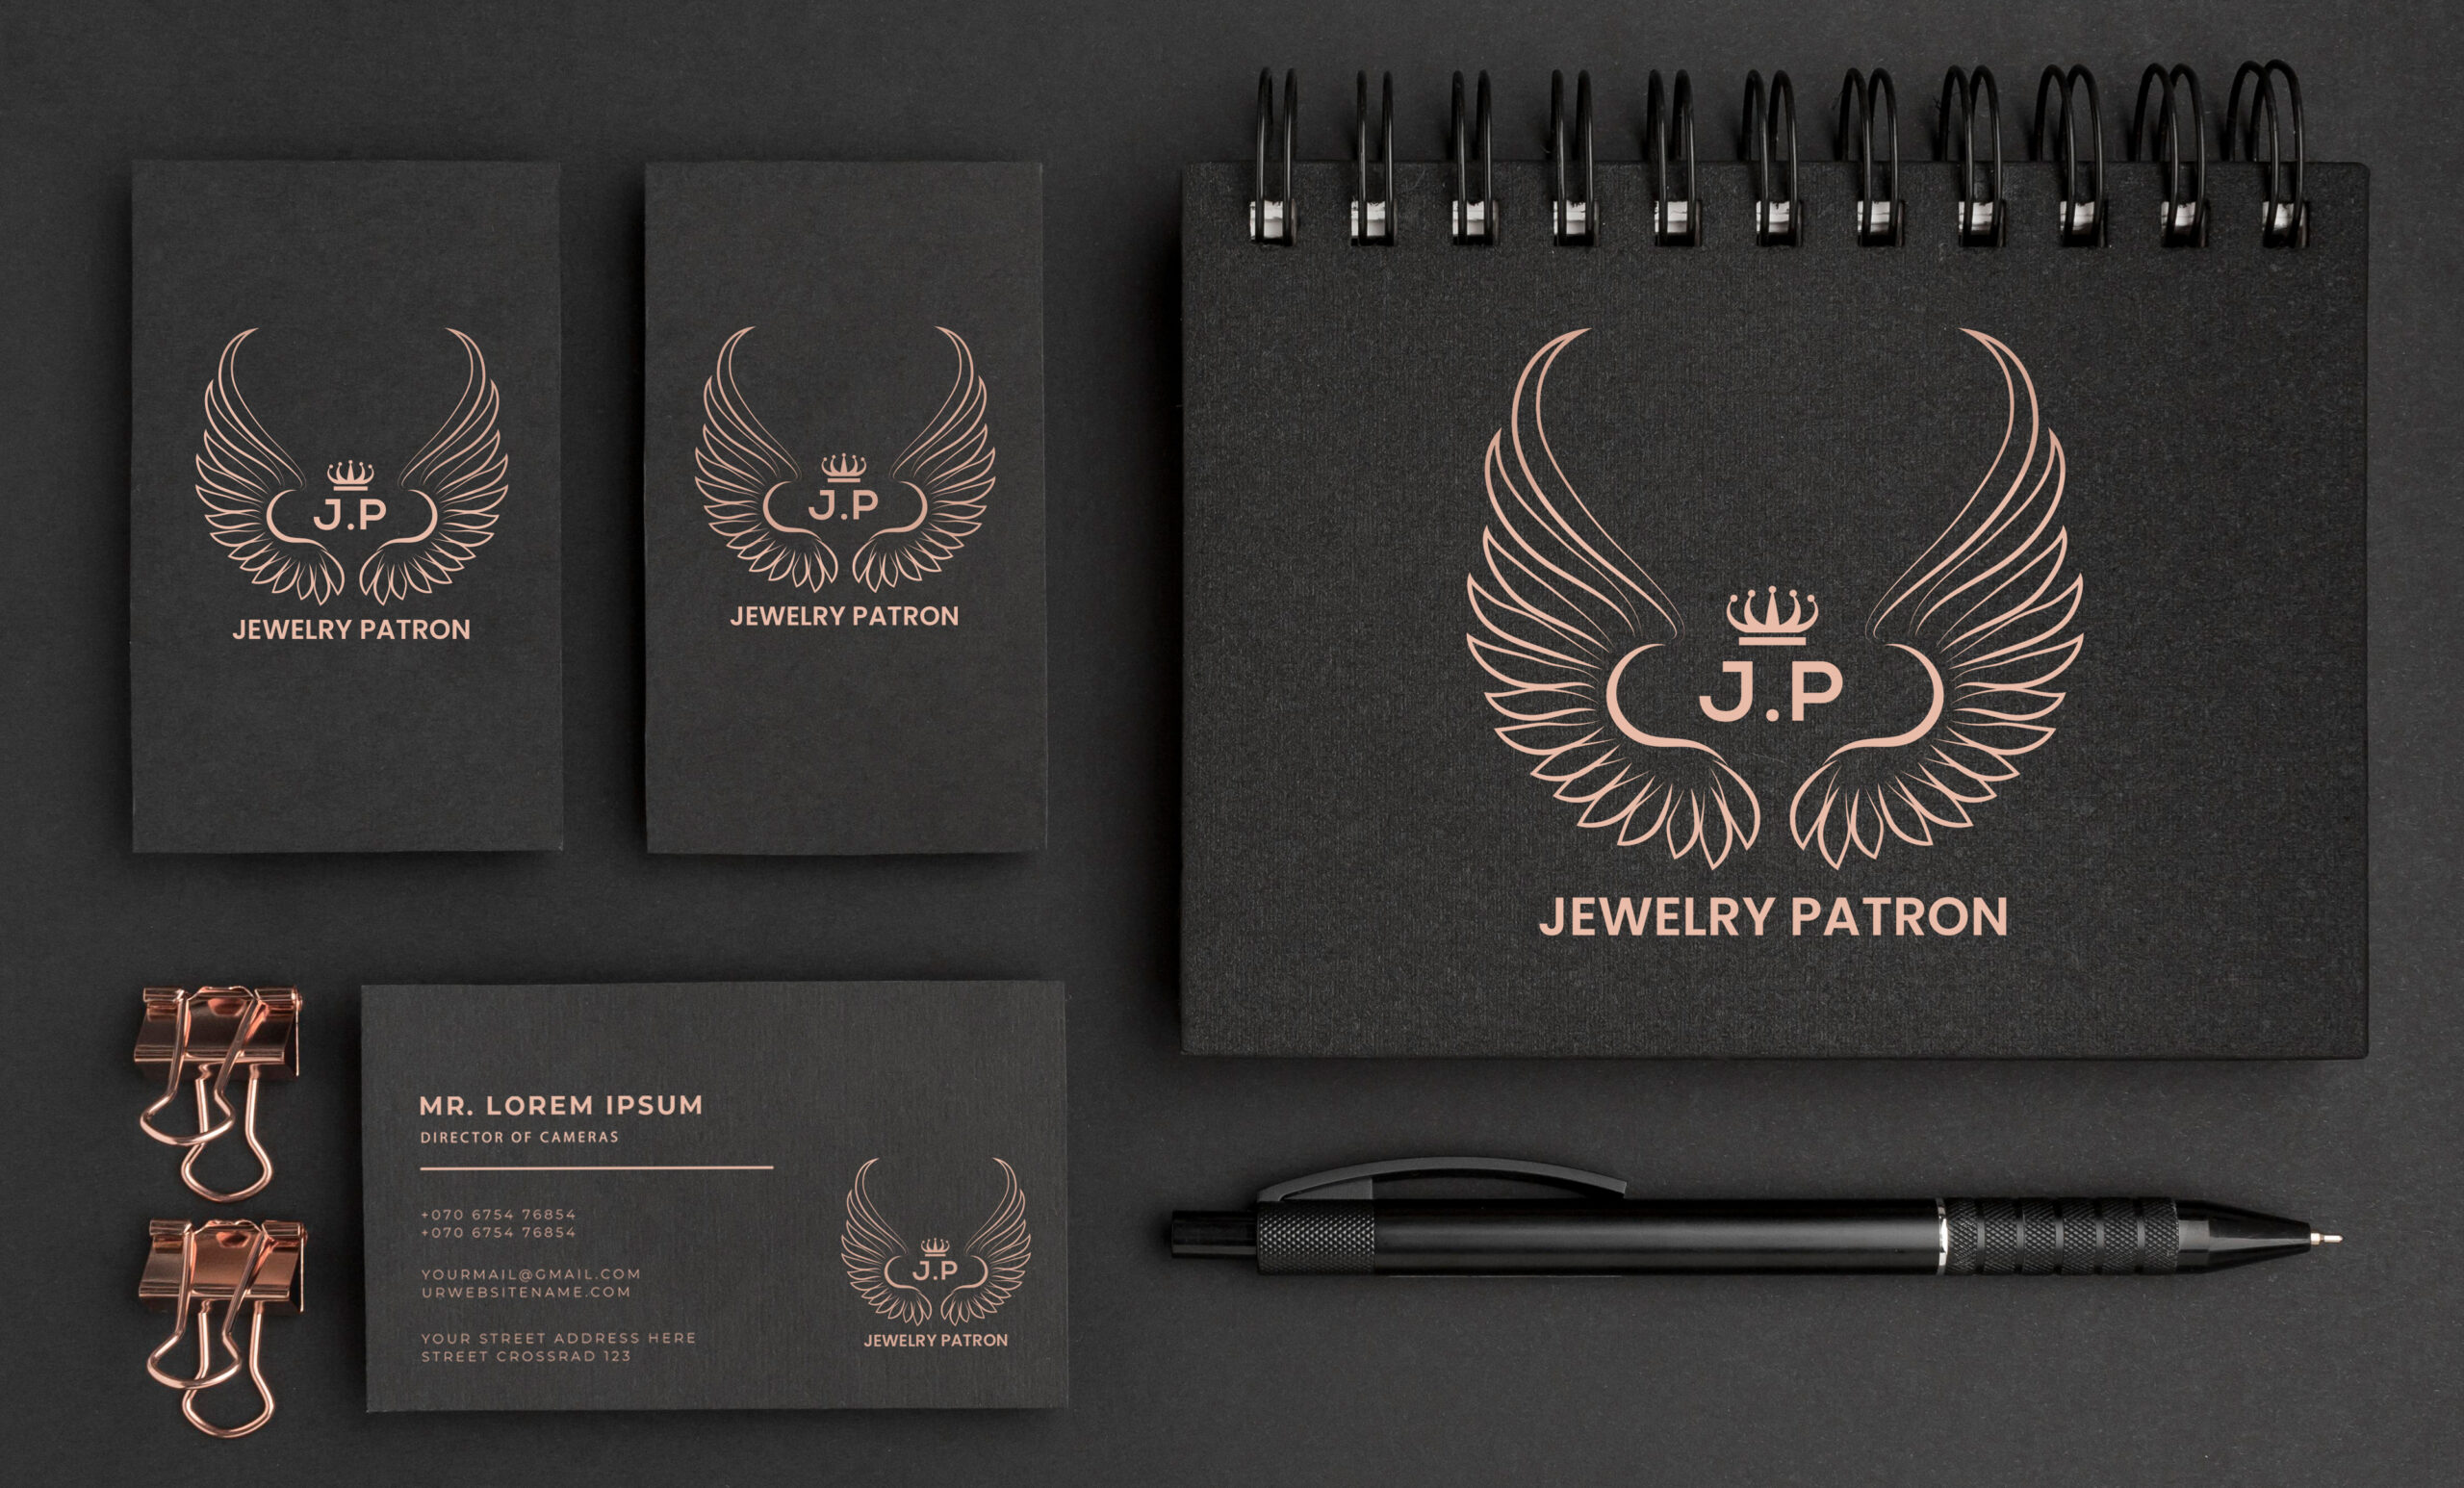 corporate business logo and brand identity with a full branding kit, logo